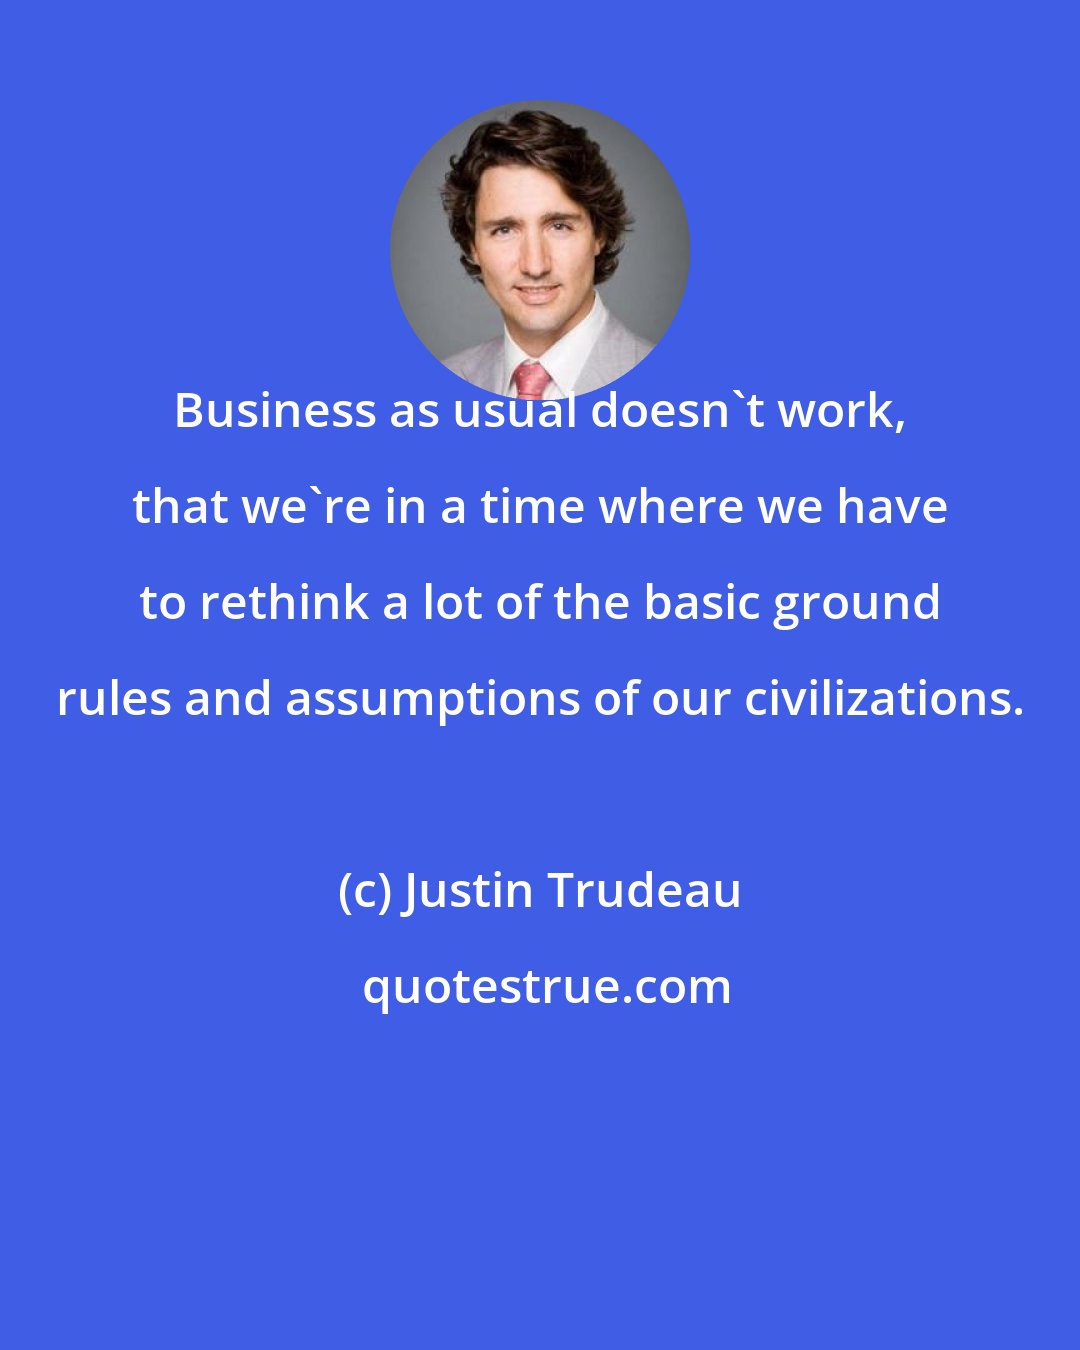 Justin Trudeau: Business as usual doesn't work, that we're in a time where we have to rethink a lot of the basic ground rules and assumptions of our civilizations.